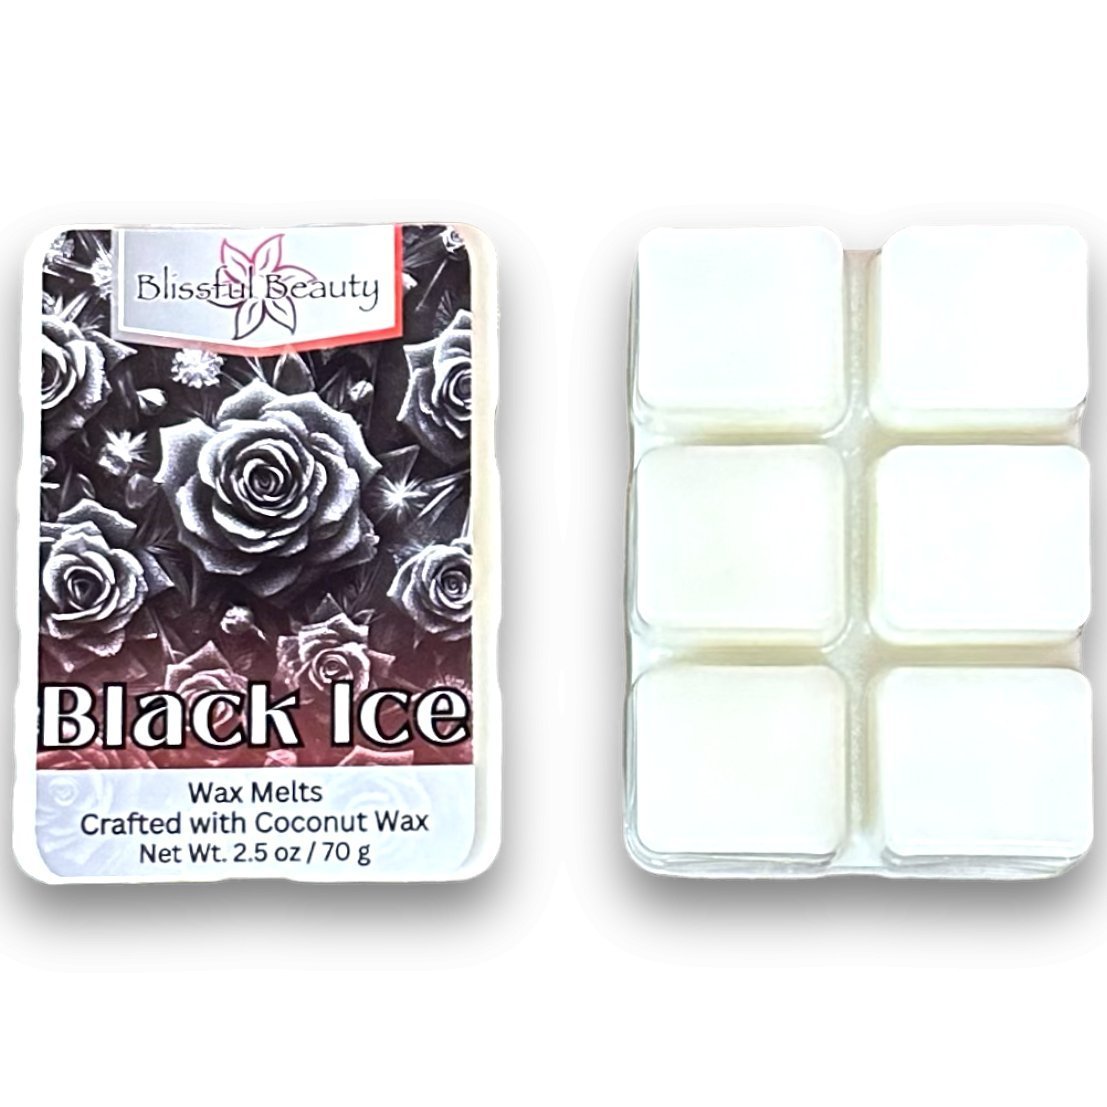 Black Ice type | Wax Melt Clamshell - Blissful Beauty Candle Co